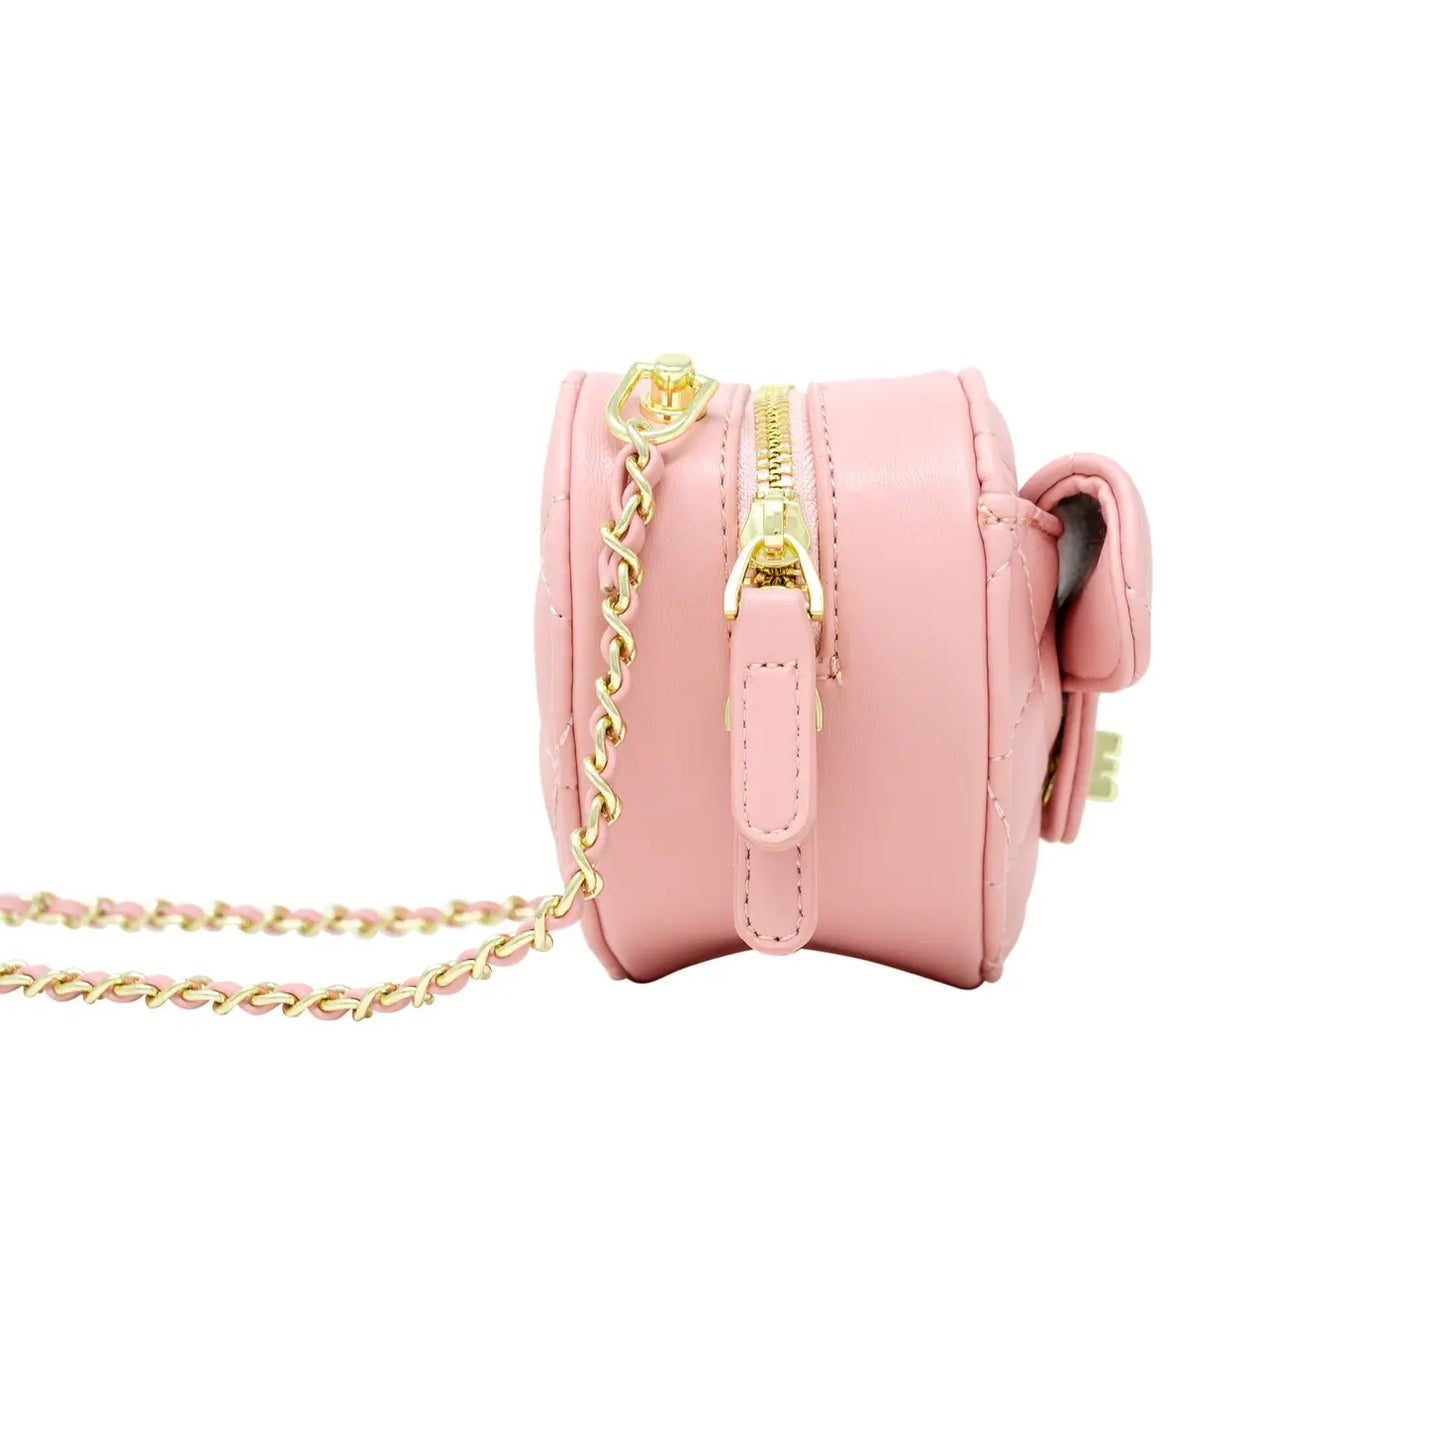 Quilted Heart Crossbody Bag - Zomi Gems